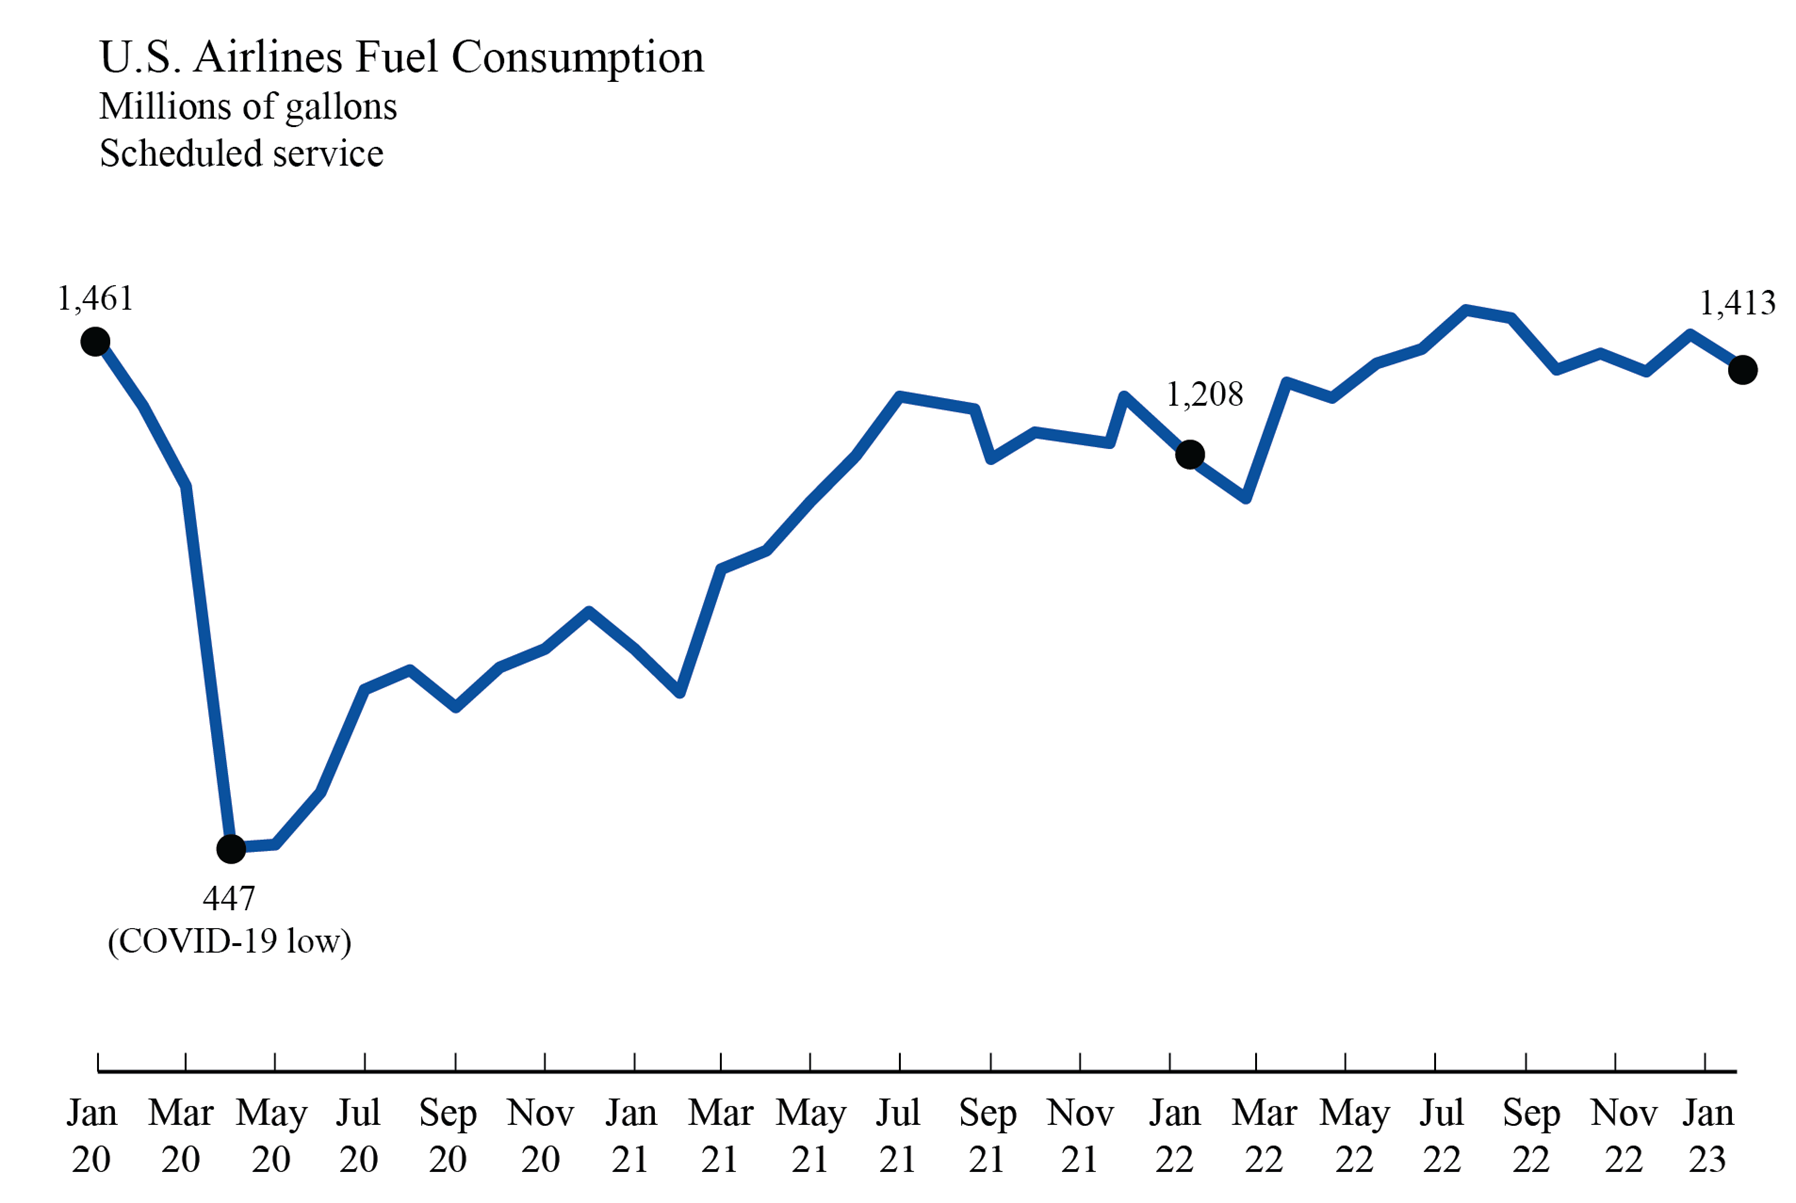 U.S. Airlines’ January 2023 Fuel Cost per Gallon Up 4.3 from December 2022; Aviation Fuel